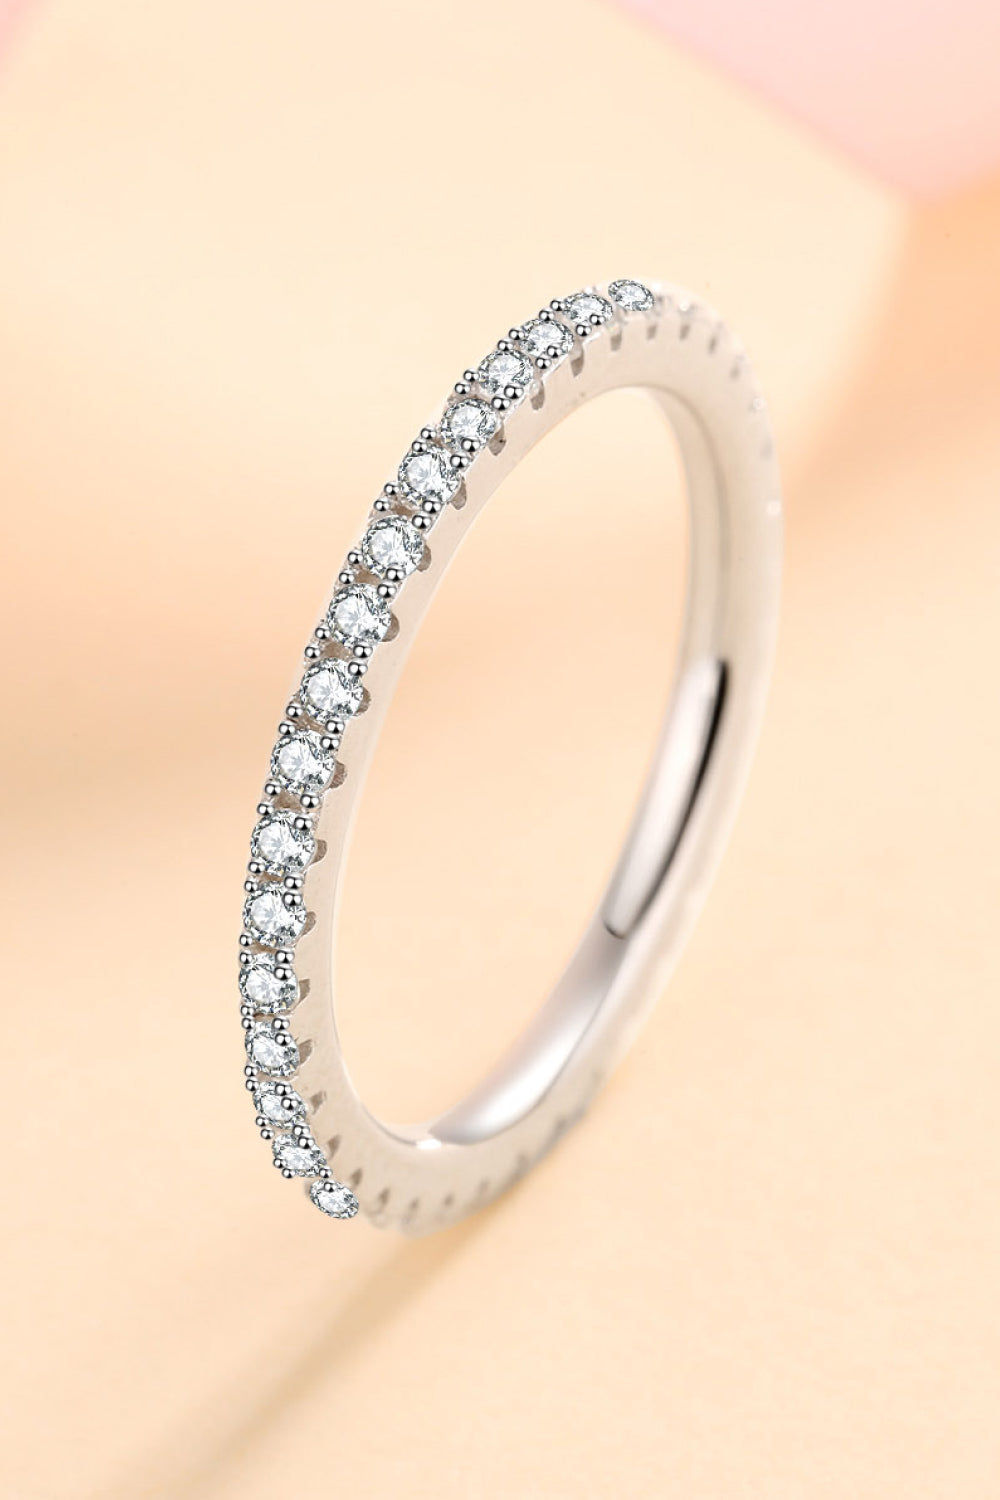 "Curious Time" 925 Sterling Silver Moissanite Ring